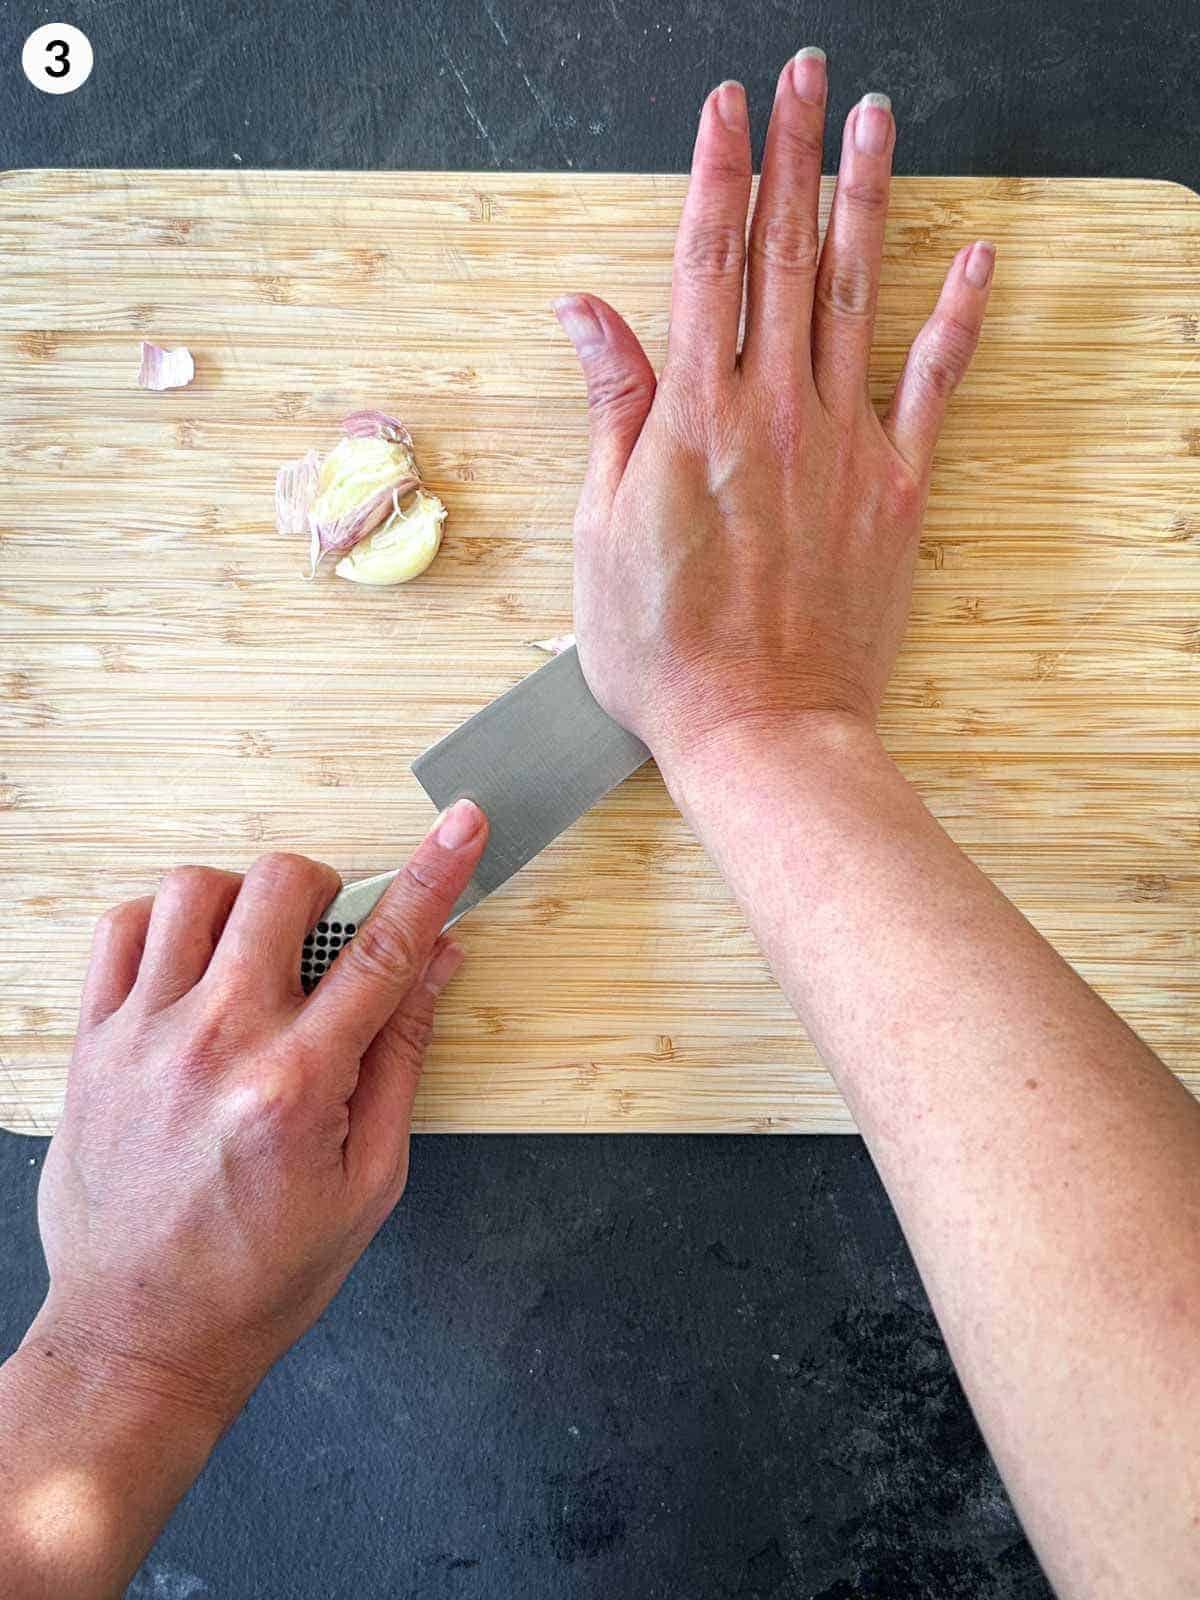 Smashing garlic cloves with a knife on a wooden chopping board